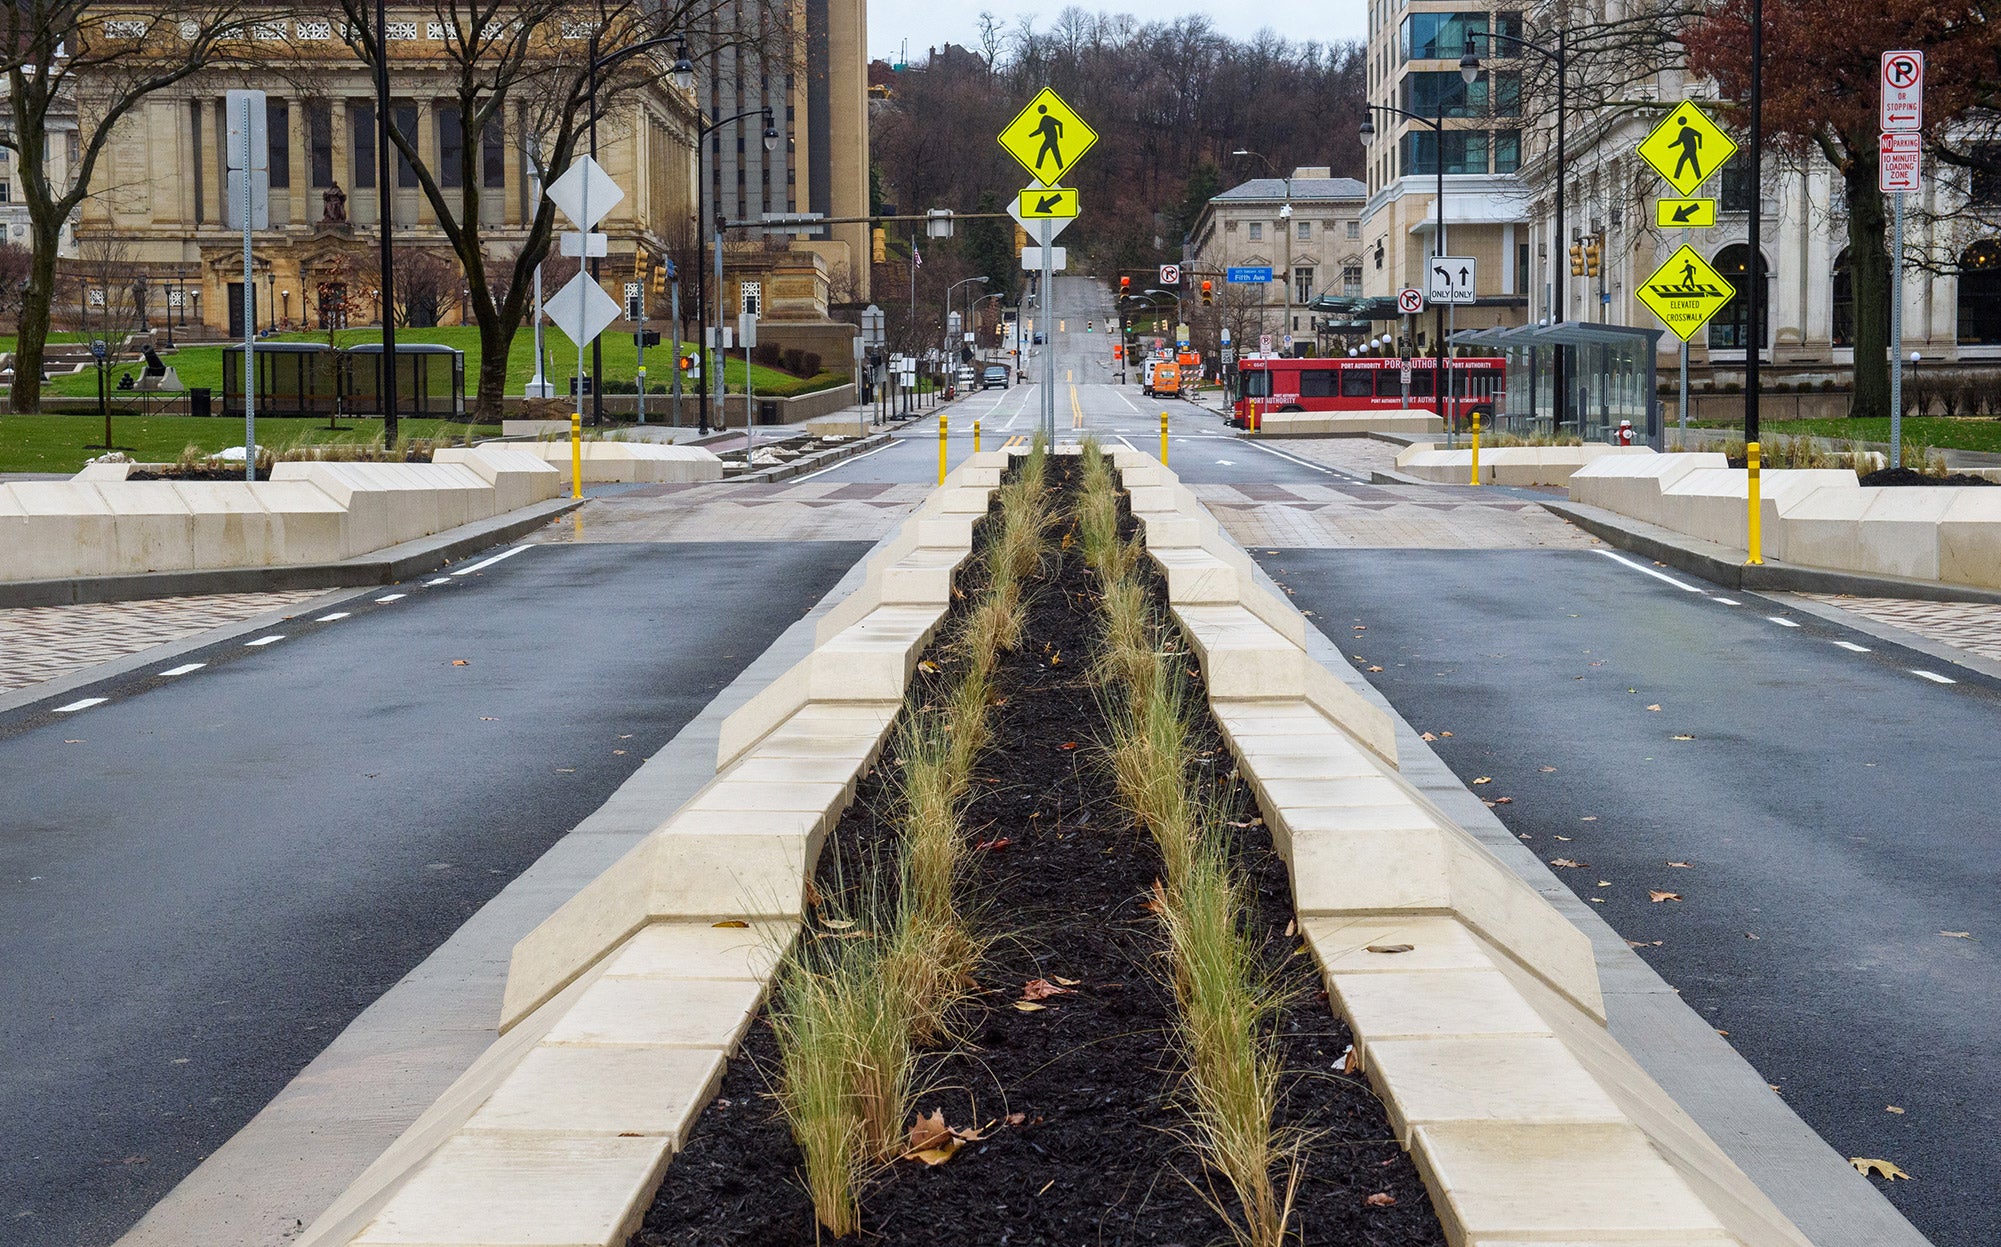 landscaped grassy lane between paved car lanes with raised pedestrian crossings